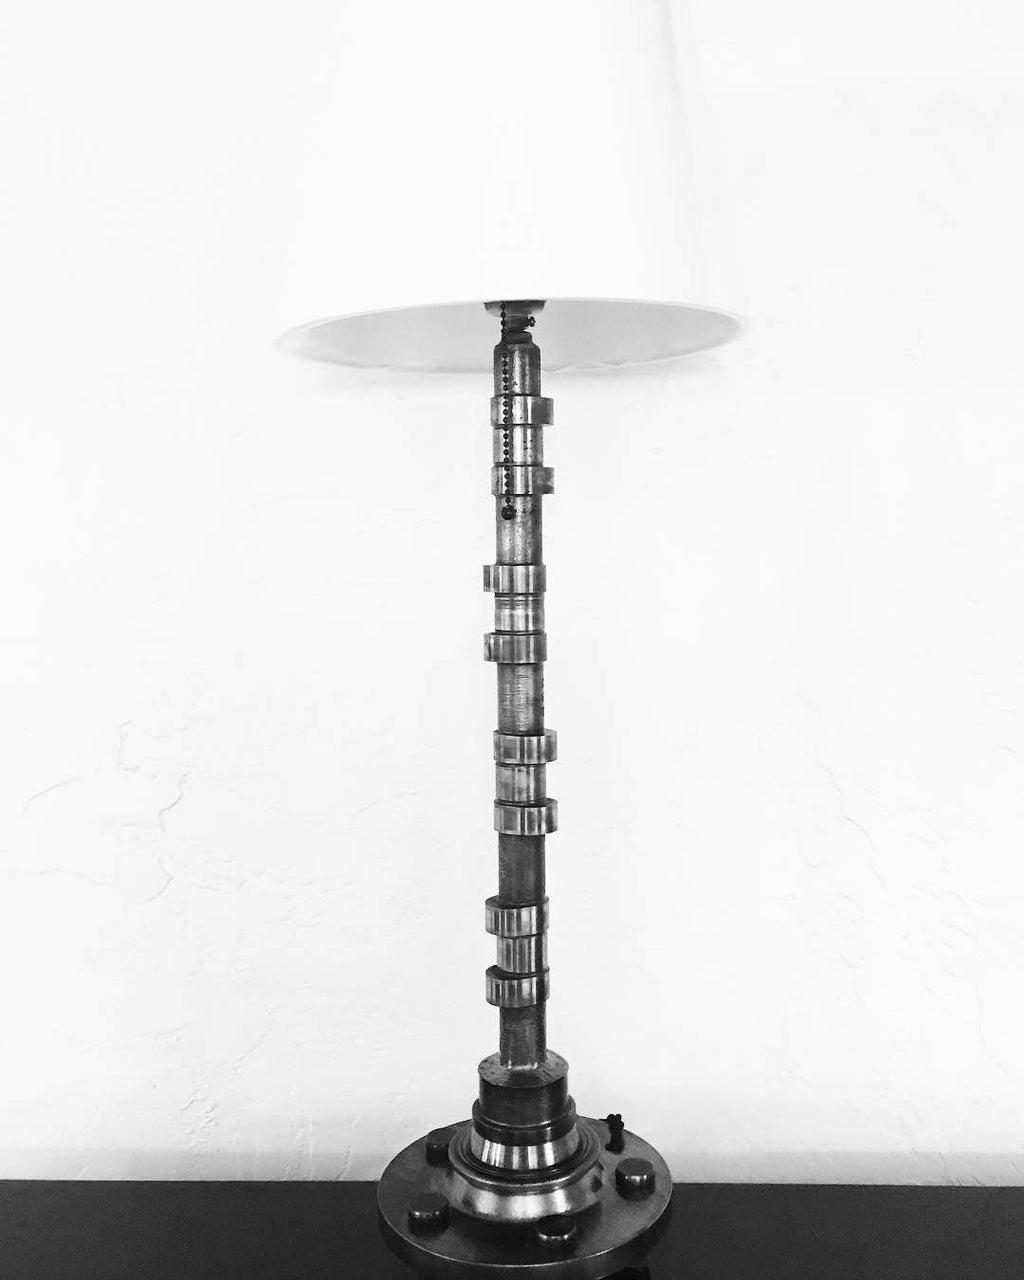 Silver lamp made out of a car's camshaft with its shade.